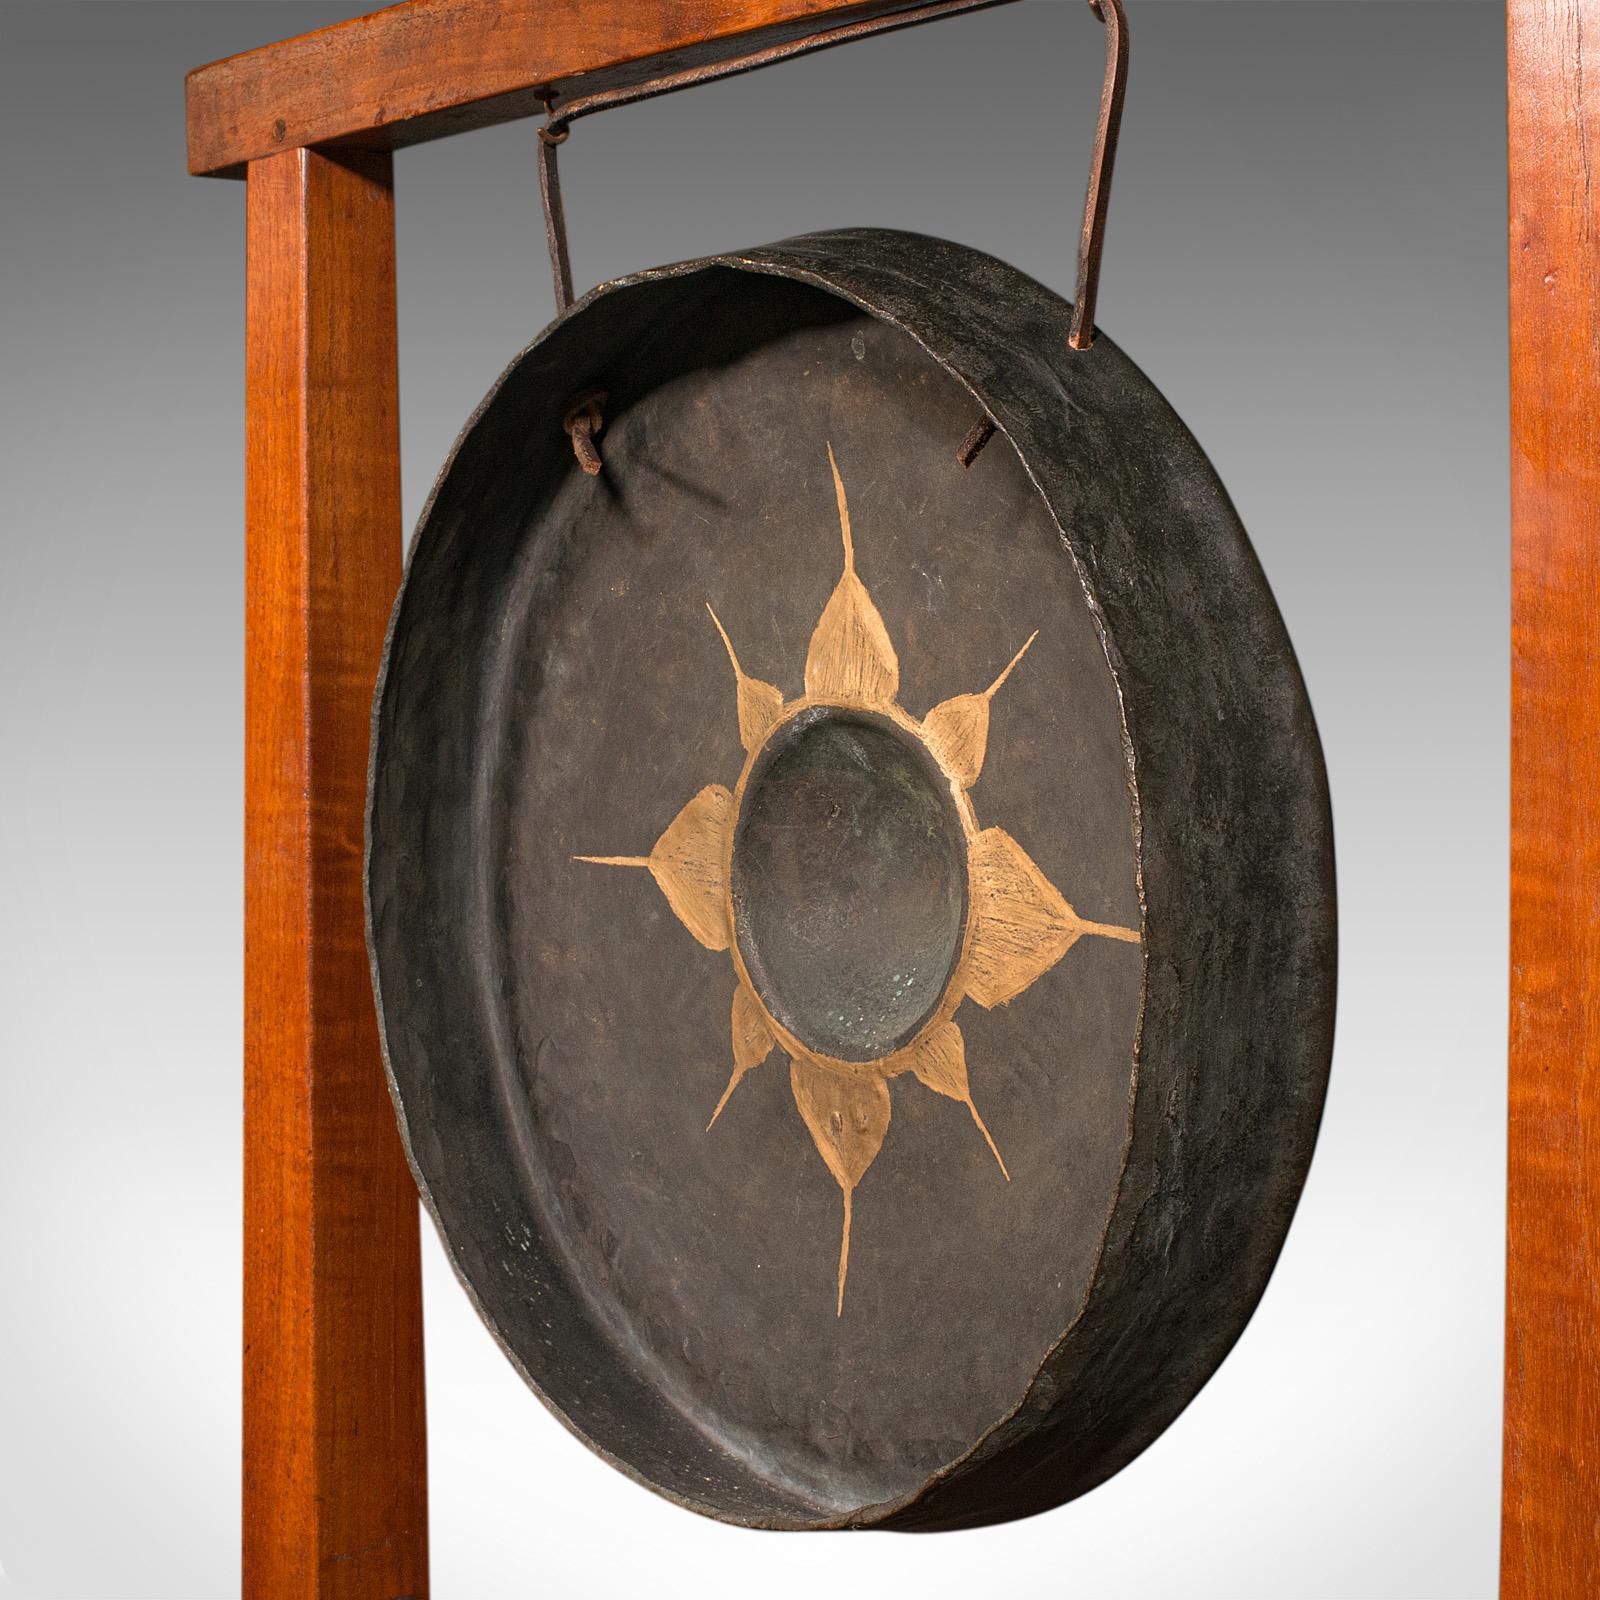 20th Century Antique Dinner Gong, English, Fruitwood, Large Chime, Arts & Crafts, Edwardian For Sale